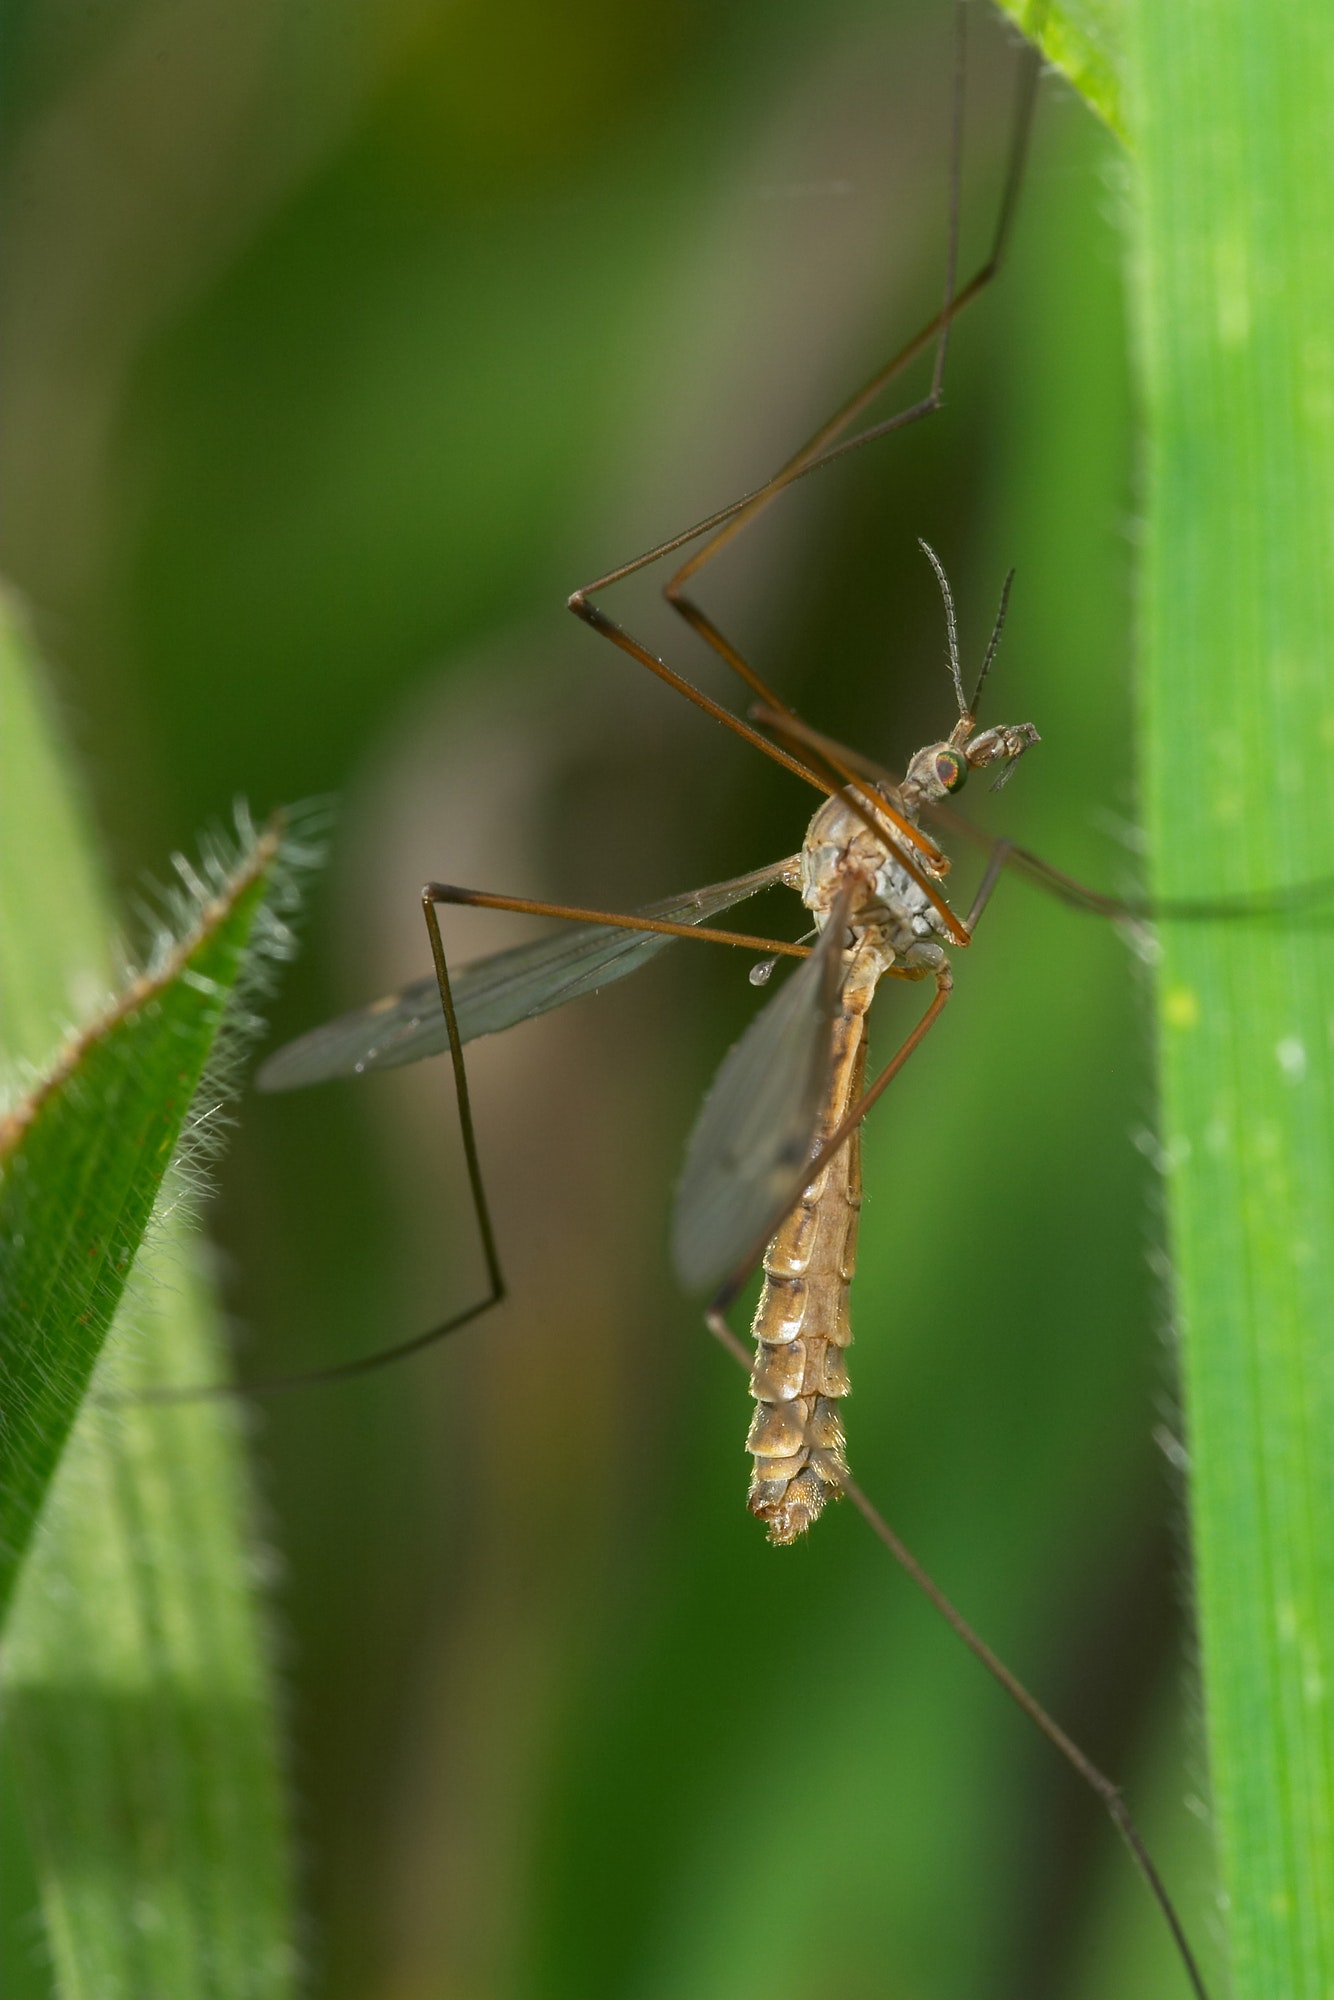 Are daddy long leg spiders poisonous? — Rianna’s student essay